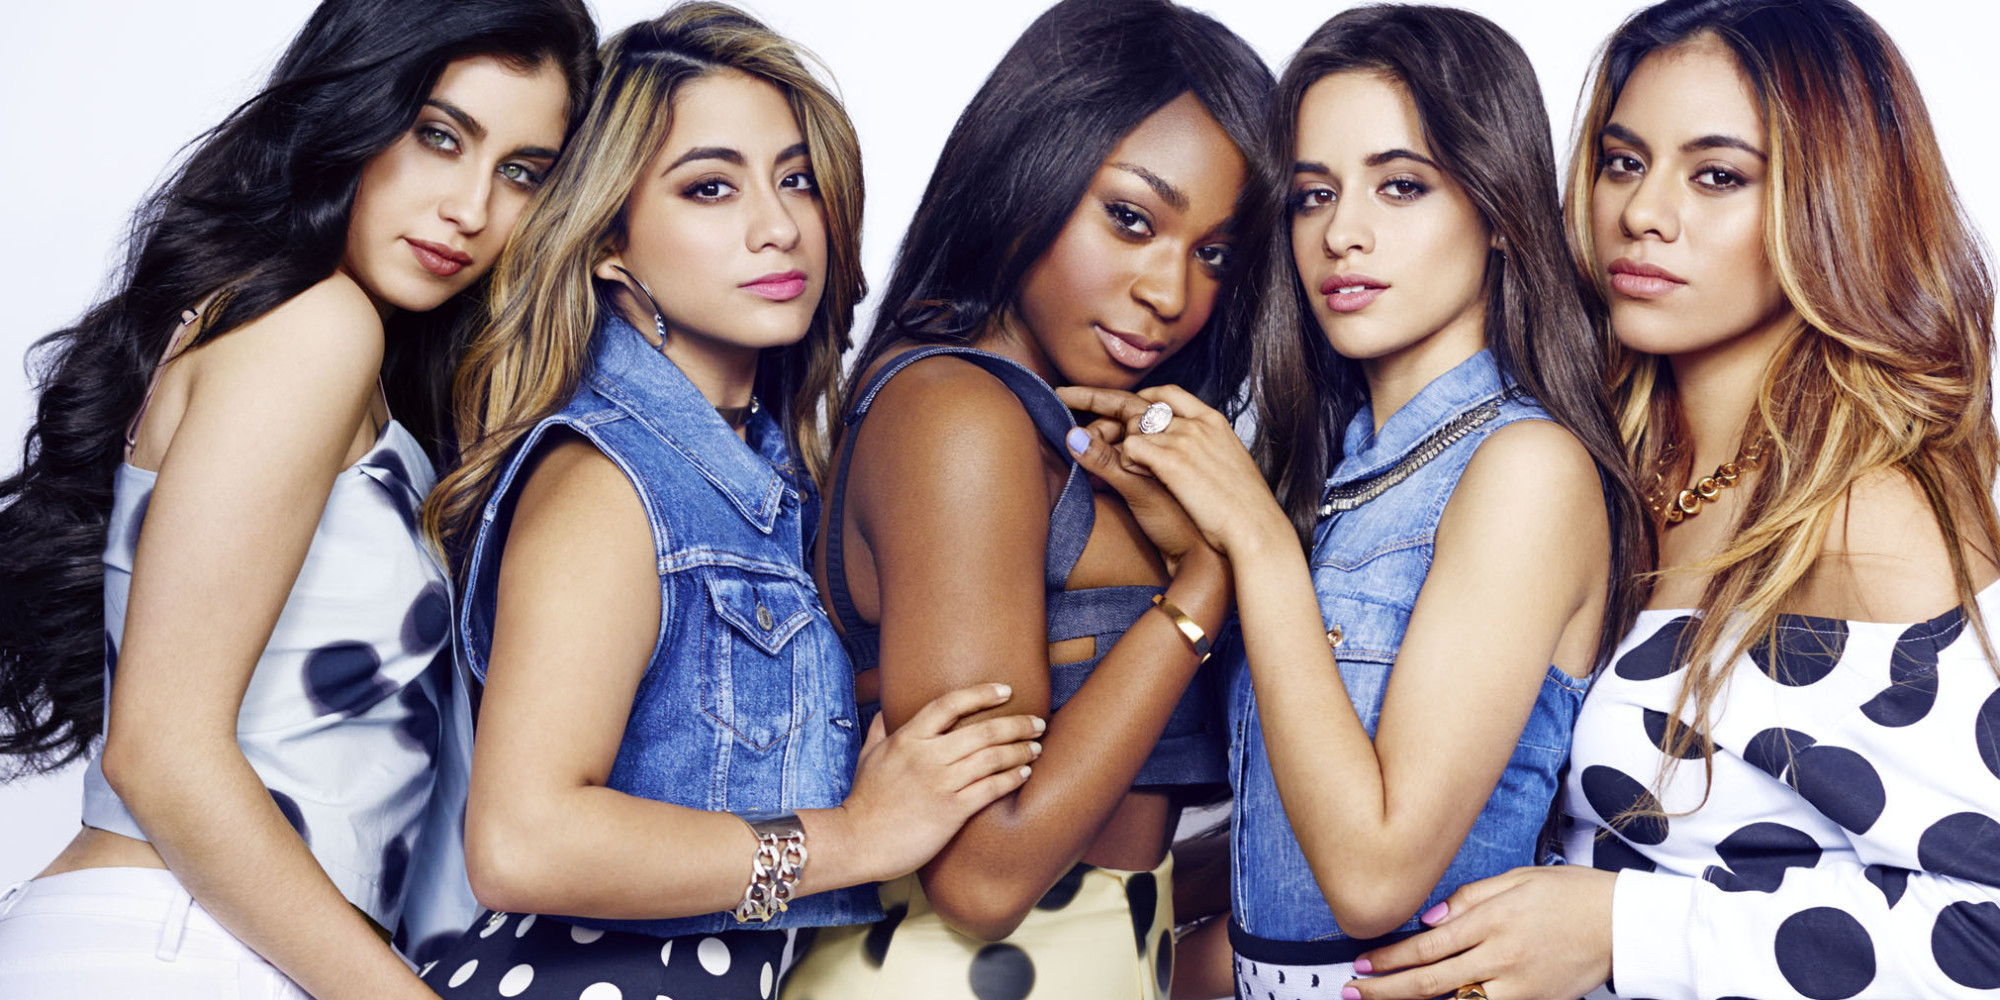 How To Be Confident And Love Yourself, According To Fifth Harmony